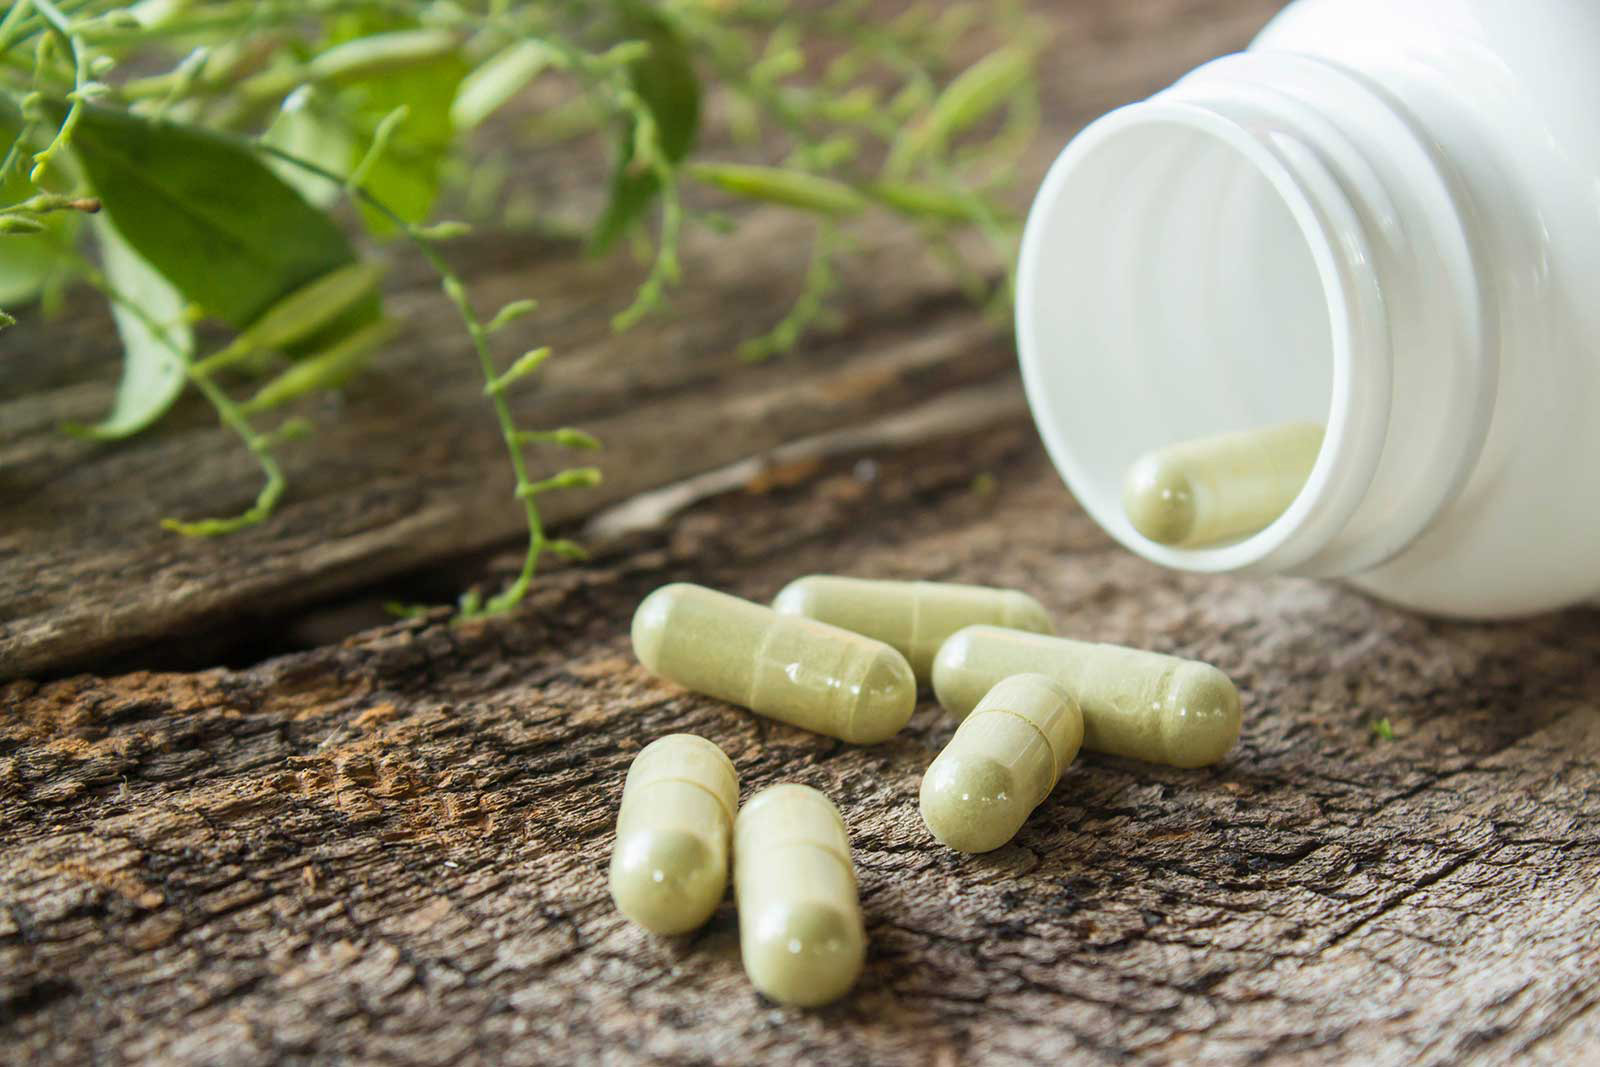 What Are Kratom Capsules Used For? How To Take Kratom in Capsules?